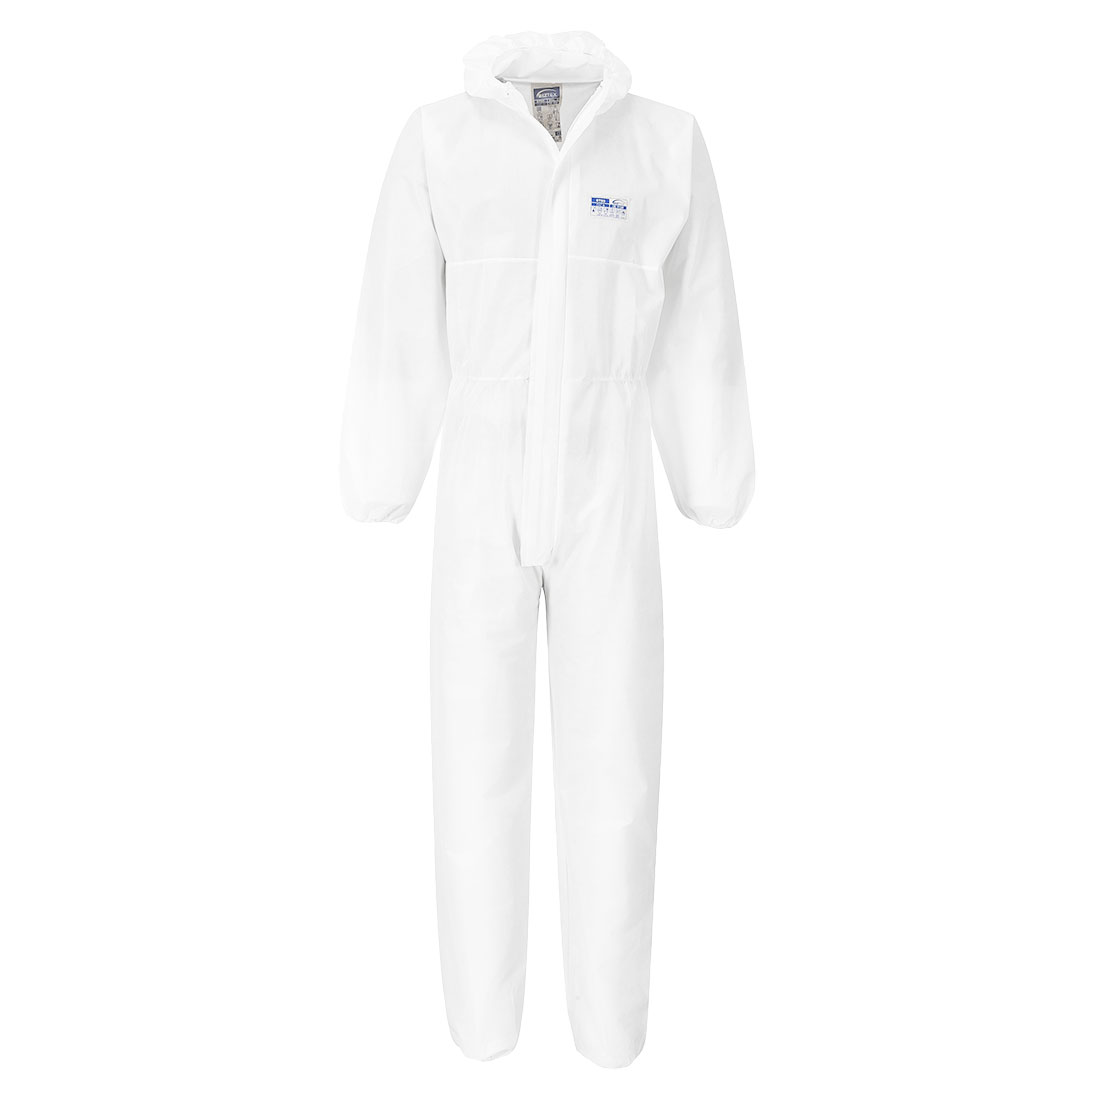 ST80 FLAME RETARDANT DISPOSABLE COVERALL TYPE 5/6 - PORTWEST